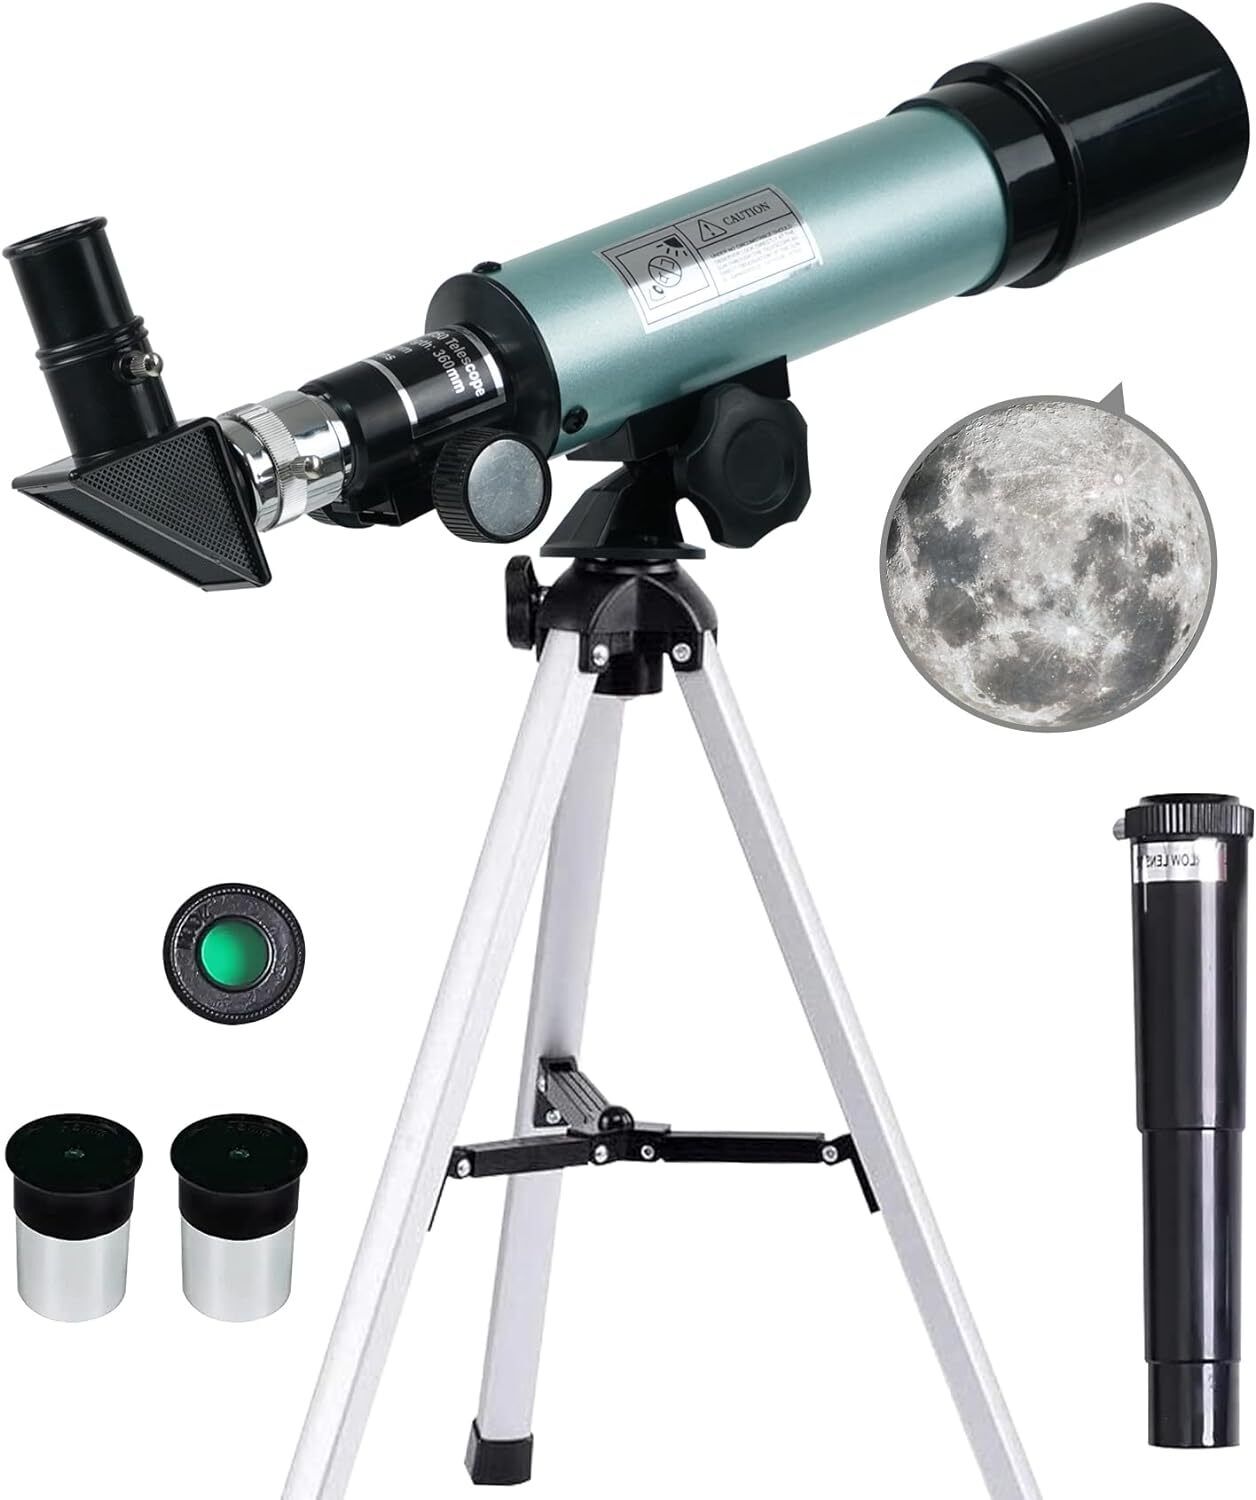 Professional Astronomical Telescope 90X Zoom HD with Tripod Kids/Adult/Beginners